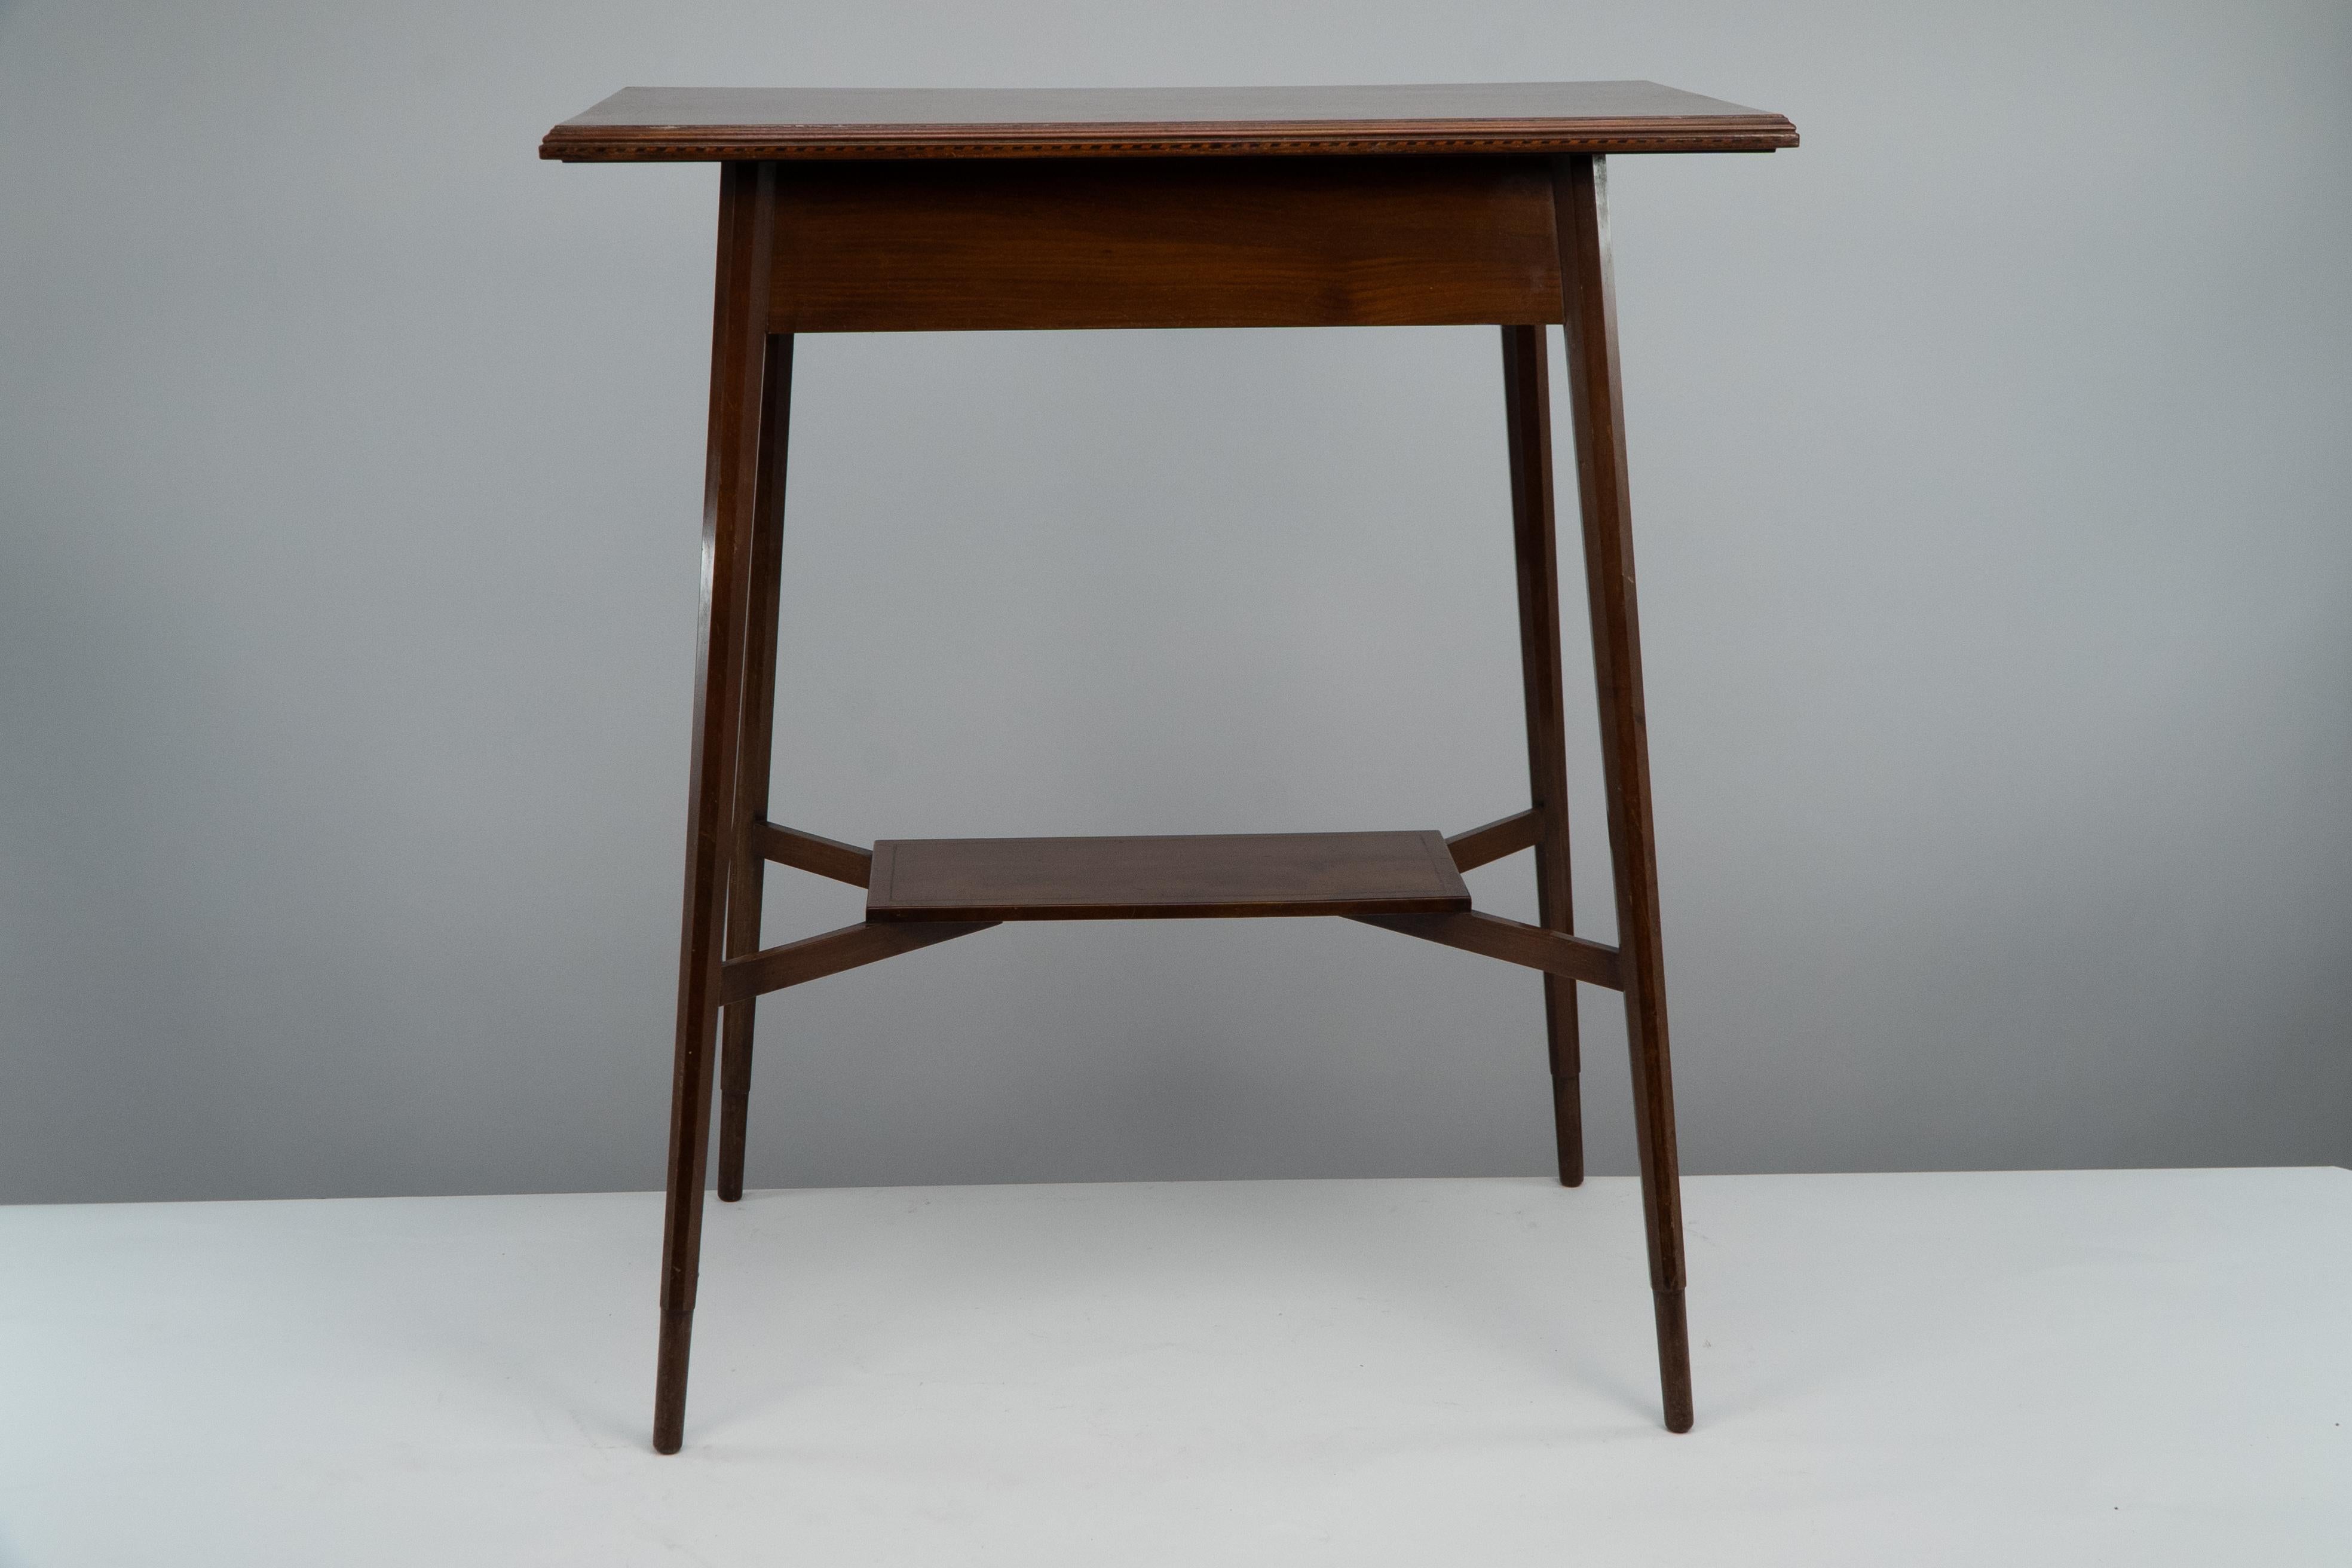 English Morris & Co. A fine quality Aesthetic Movement walnut side table. For Sale